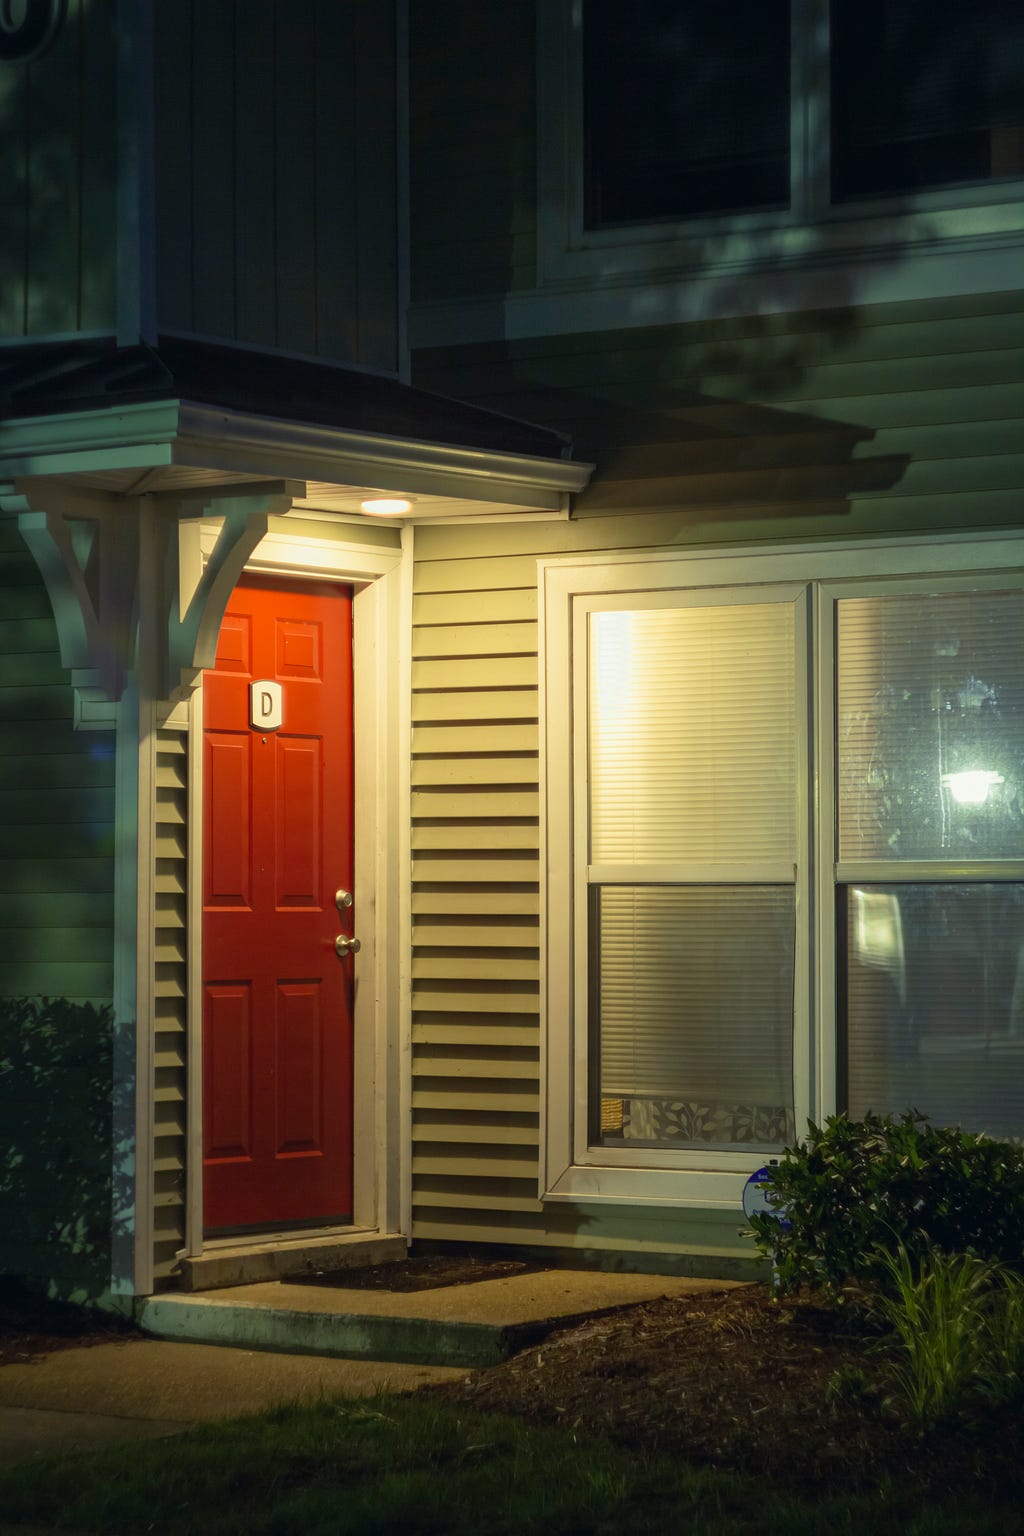 A red front door of an apartment, illuminated by a porch light